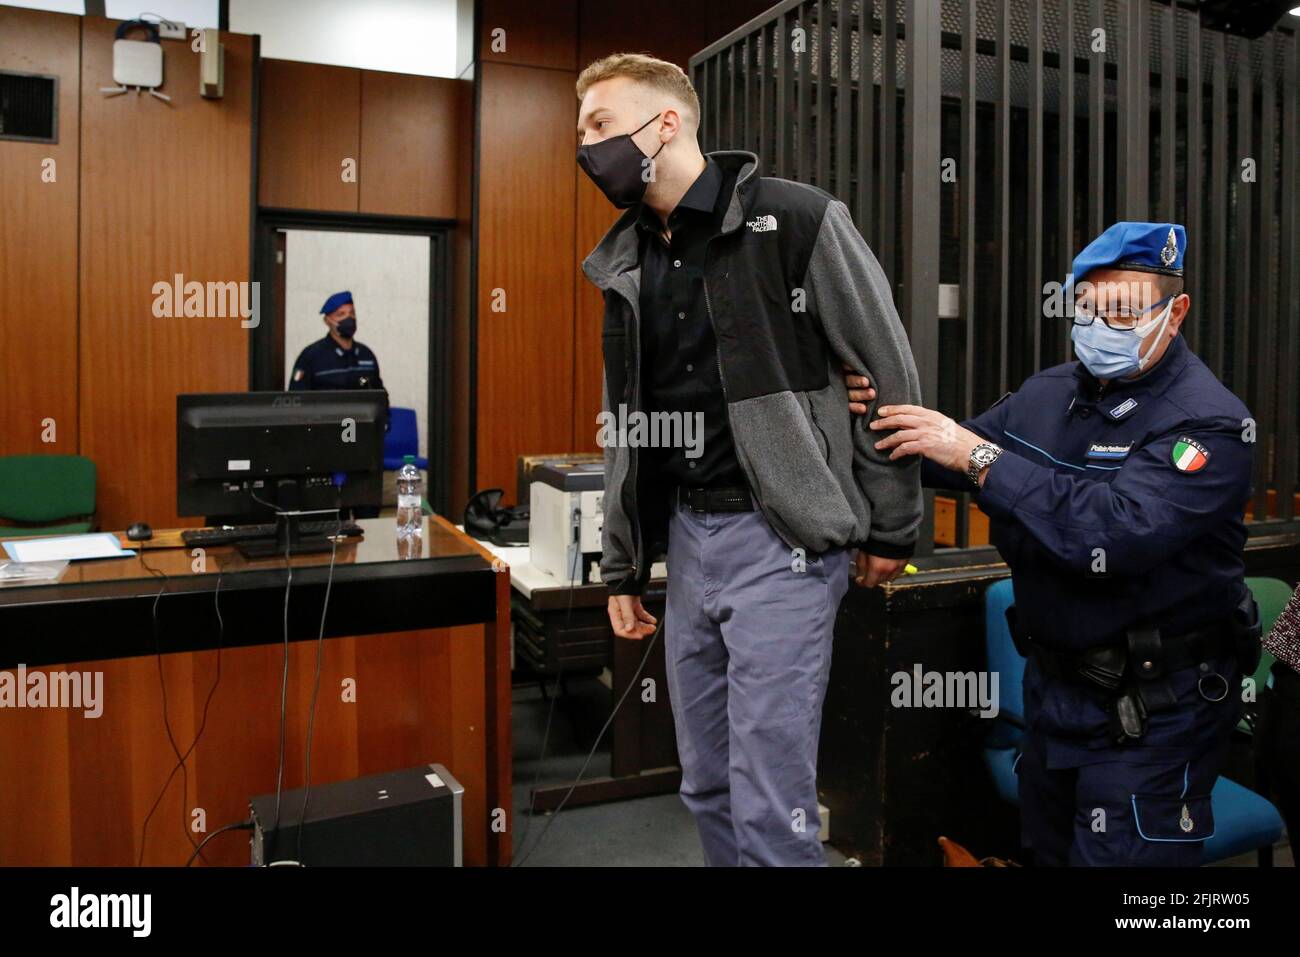 . citizen Finnegan Lee Elder, who is being tried on murder charges after  Italian Carabinieri paramilitary police officer Mario Cerciello Rega was  killed in July 2019, leaves the courtroom during a break